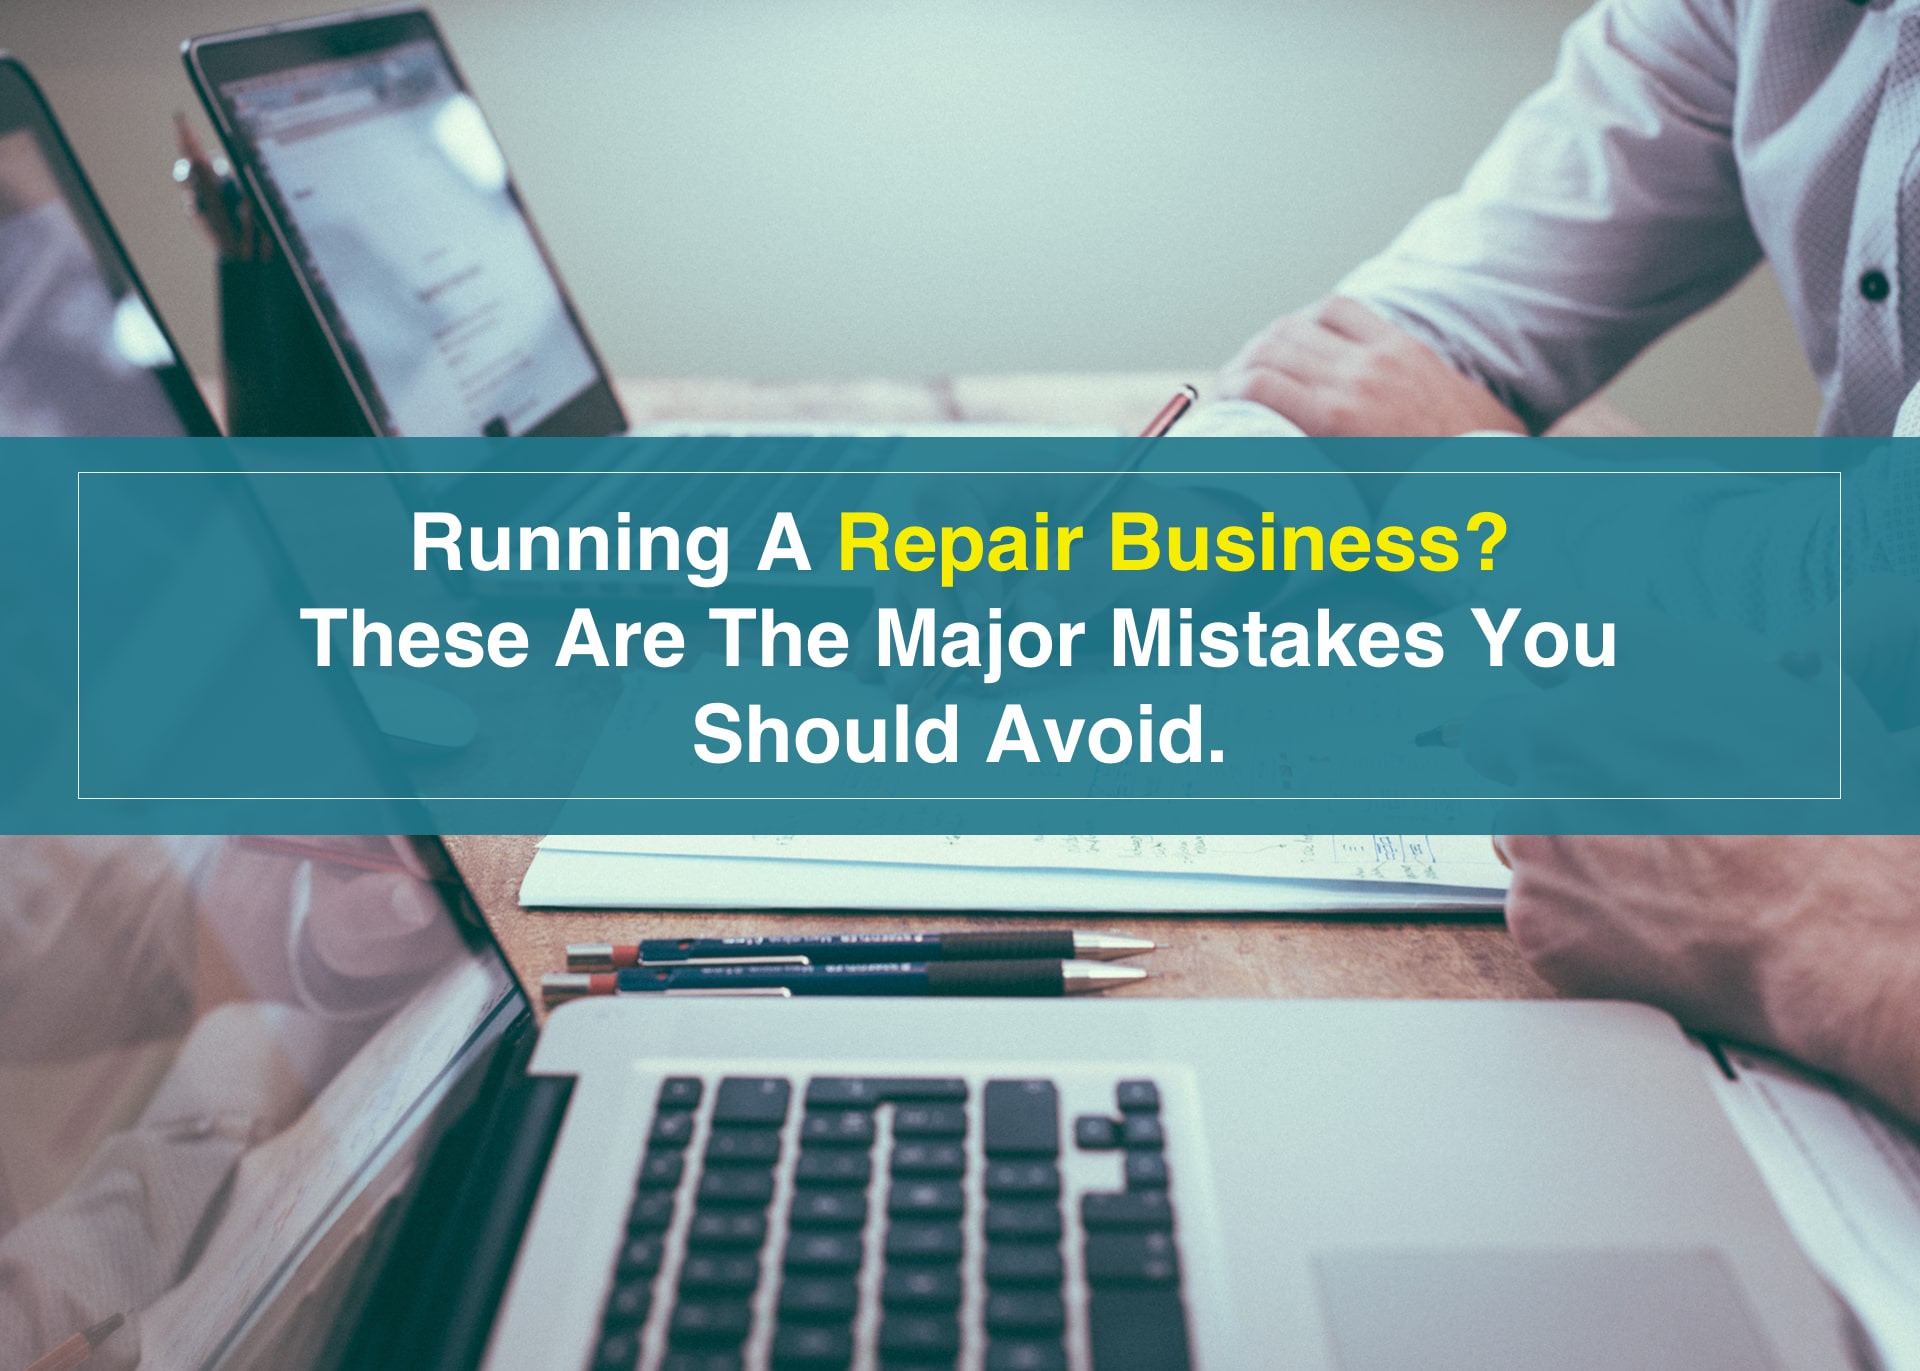 Major mistakes that all the-repair-businesses should avoid